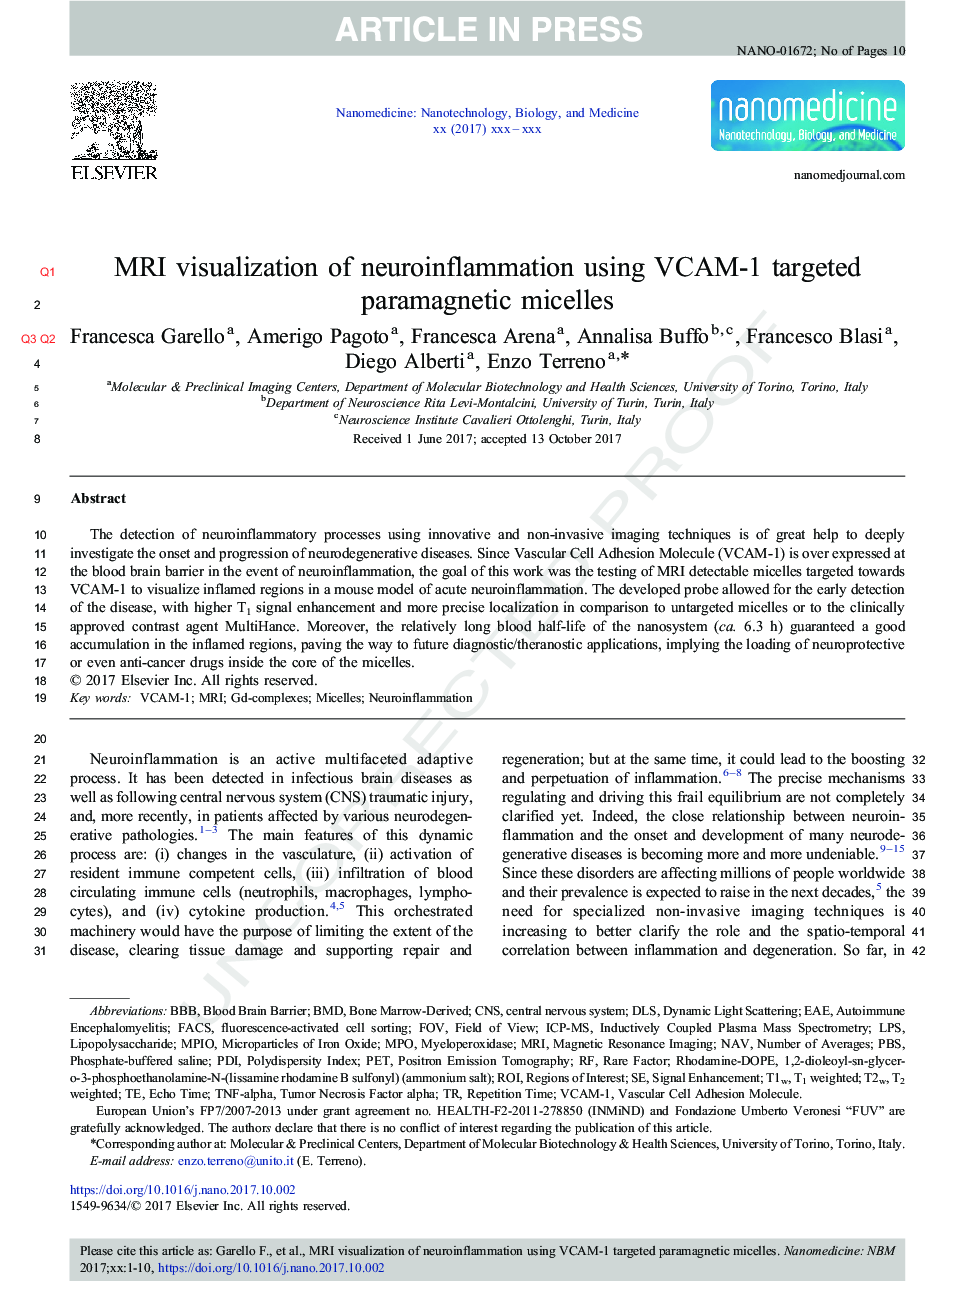 MRI visualization of neuroinflammation using VCAM-1 targeted paramagnetic micelles